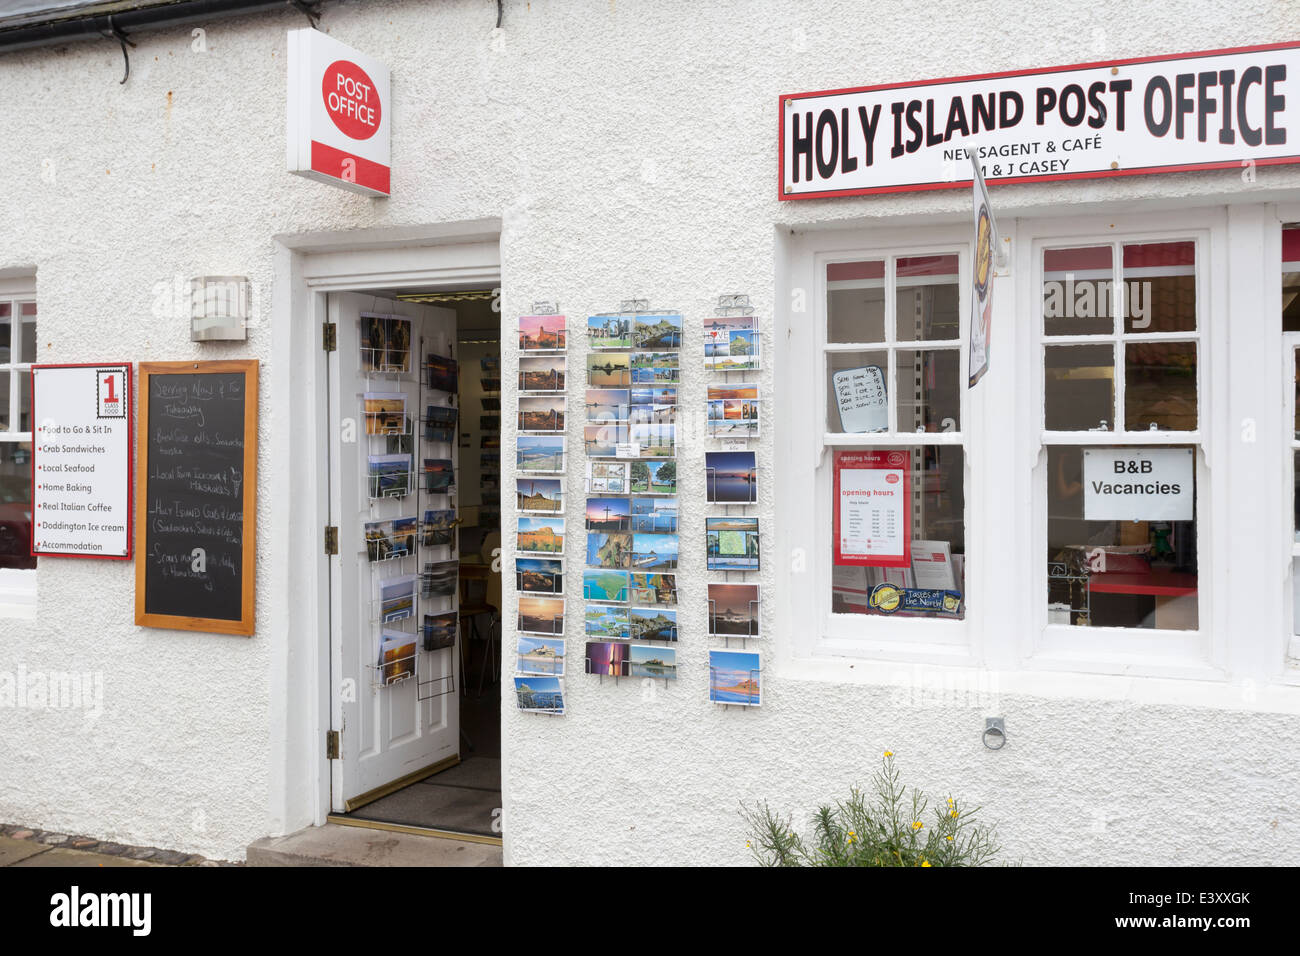 Post Office on Holy Island Lindisfarne Stock Photo